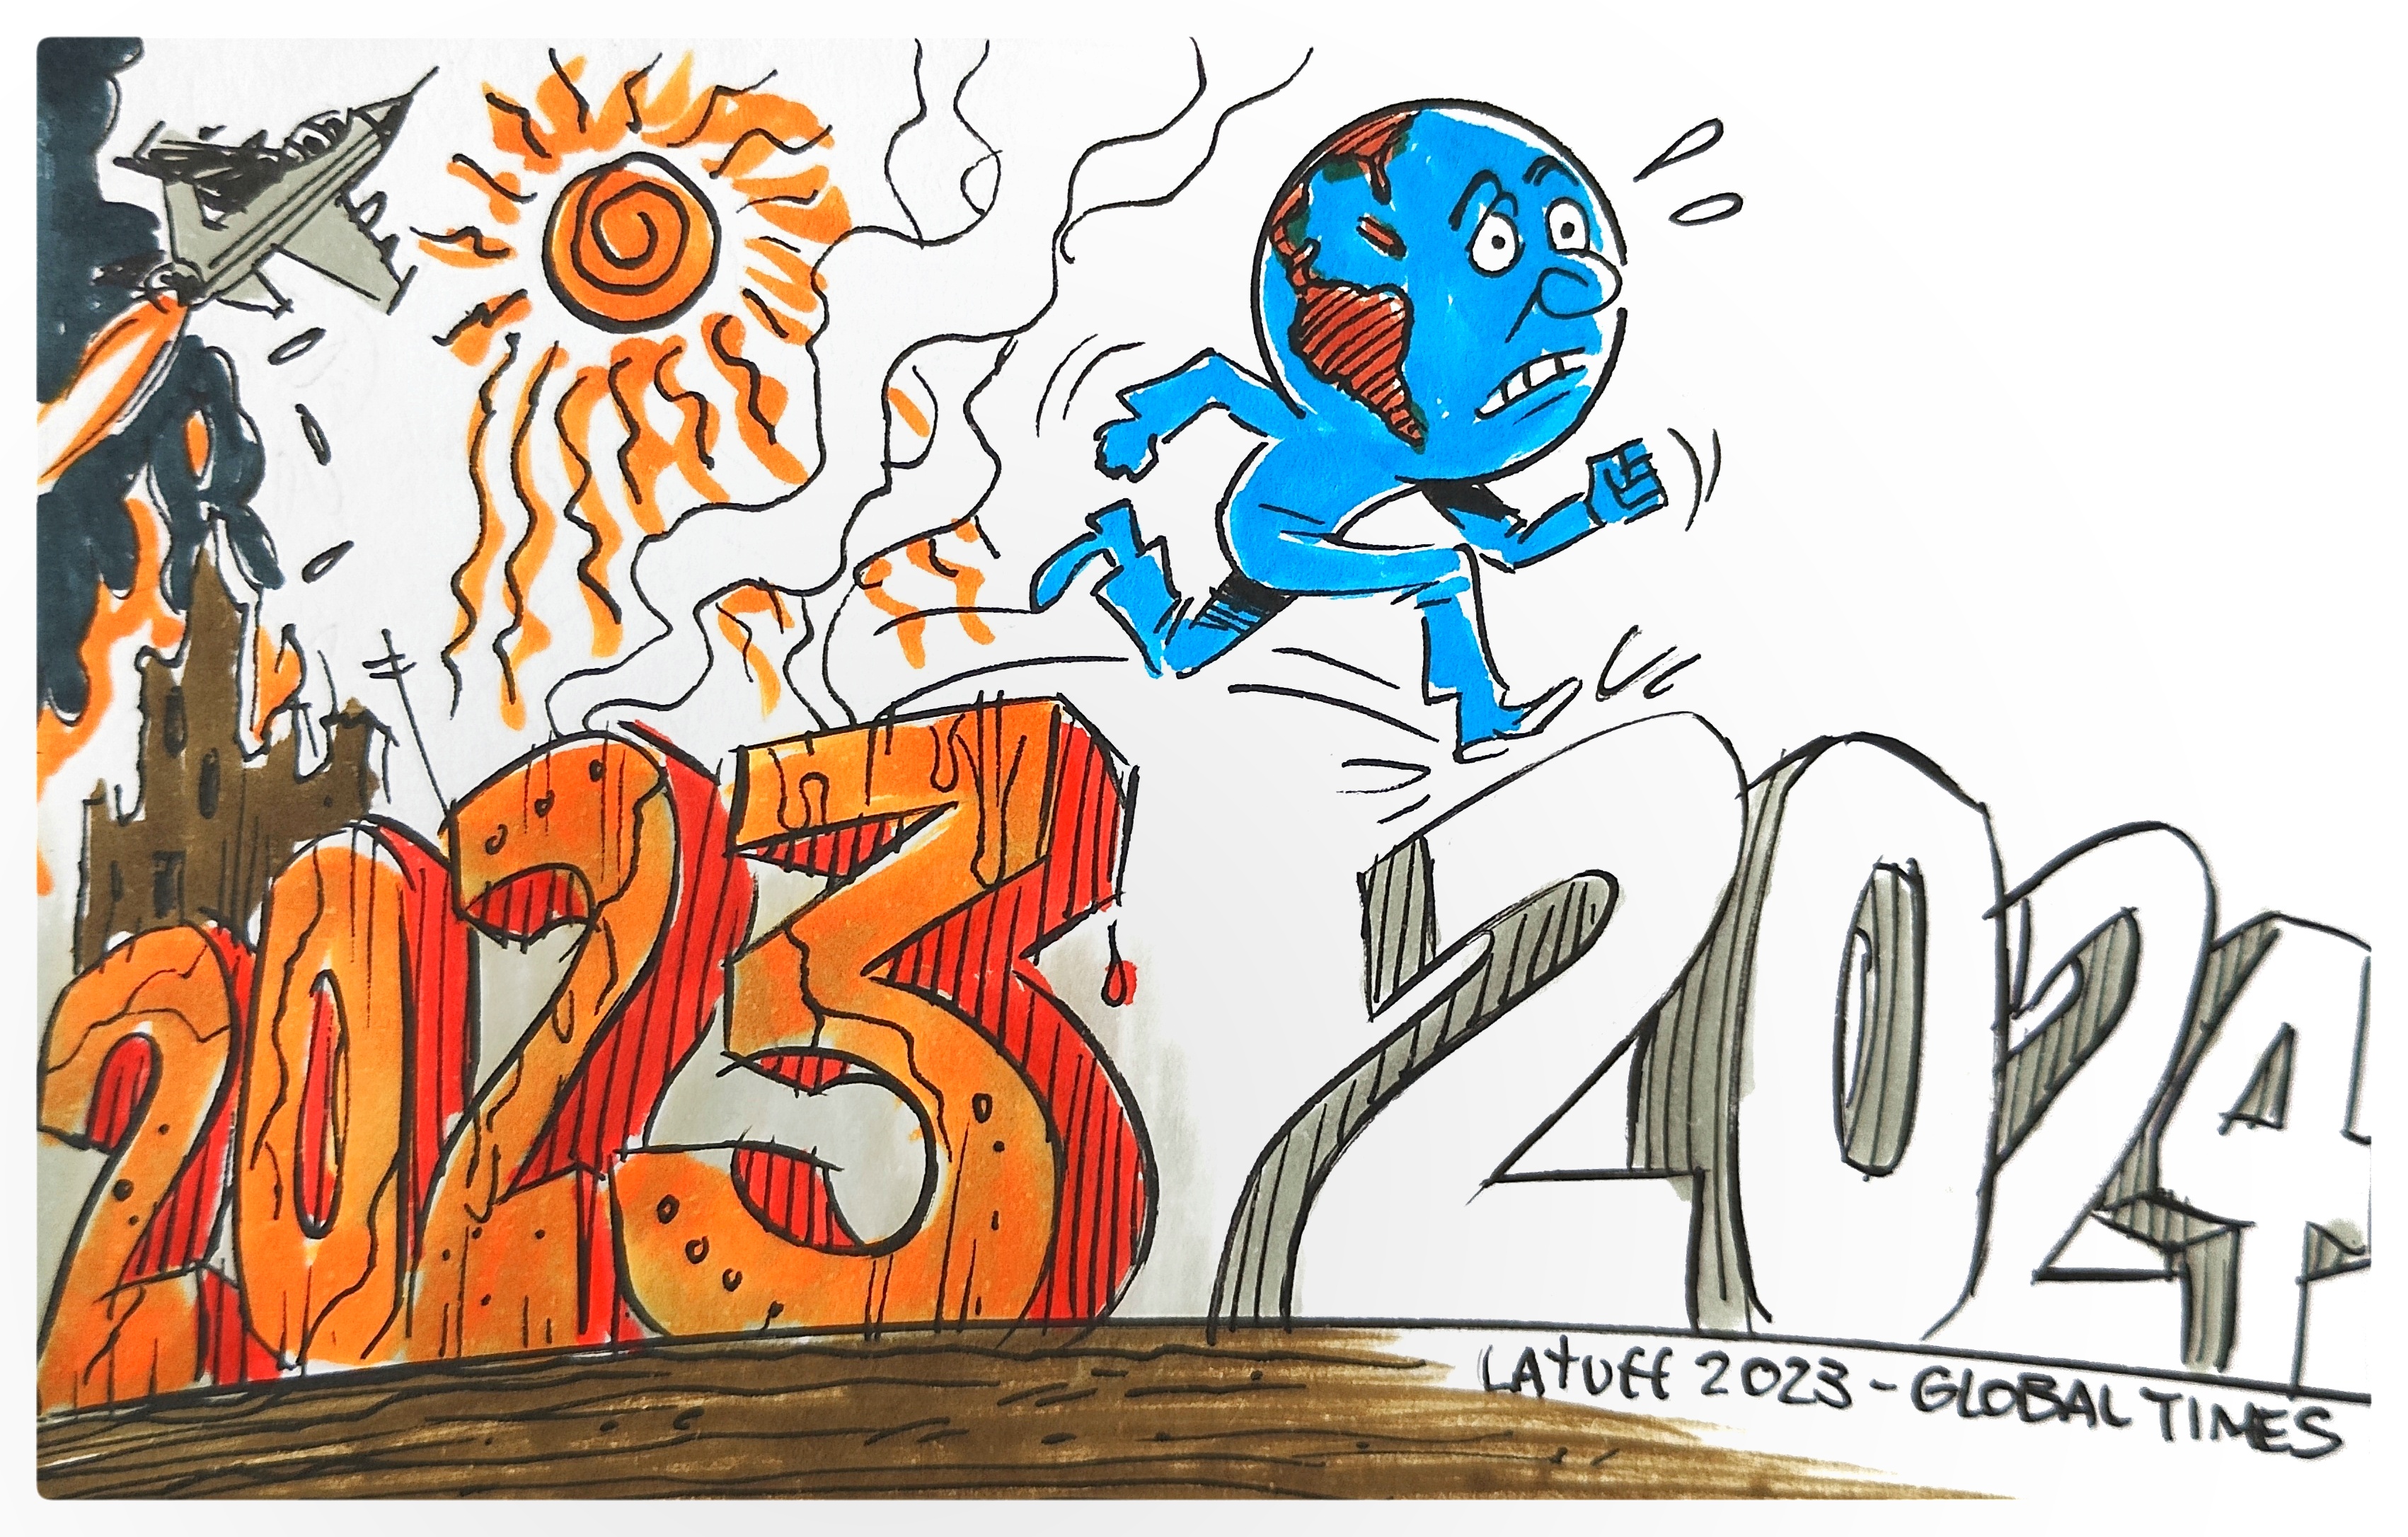 Will the world witness a turnaround in 2024 after a chaotic 2023? Cartoon: Carlos Latuff